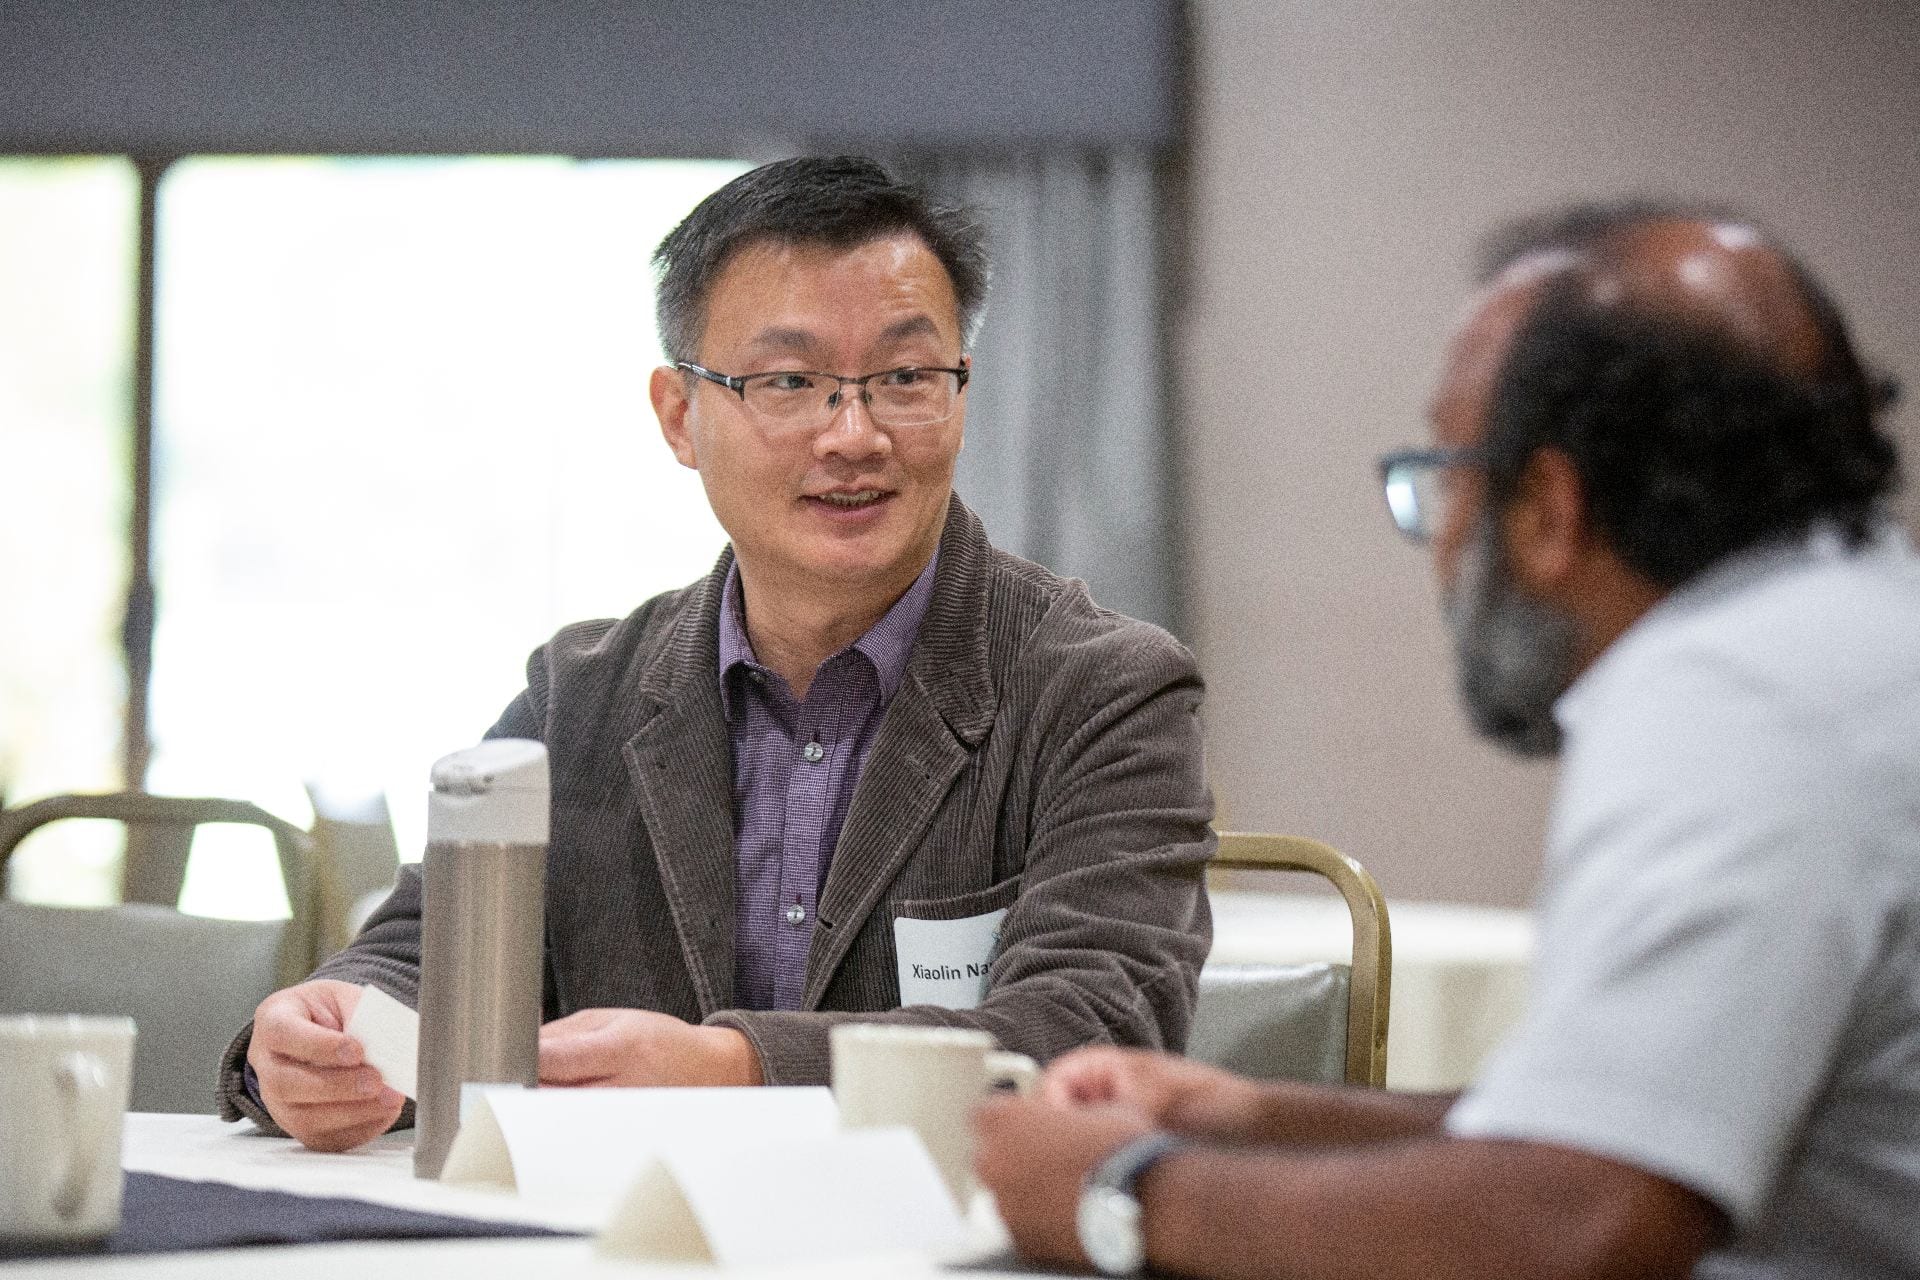 Photo of Xiaolin Nan (left), an assistant professor in the OHSU Department of Biomedical Engineering, and UO’s Ramesh Jasti (right), an associate professor in UO’s Department of Chemistry and Biochemistry